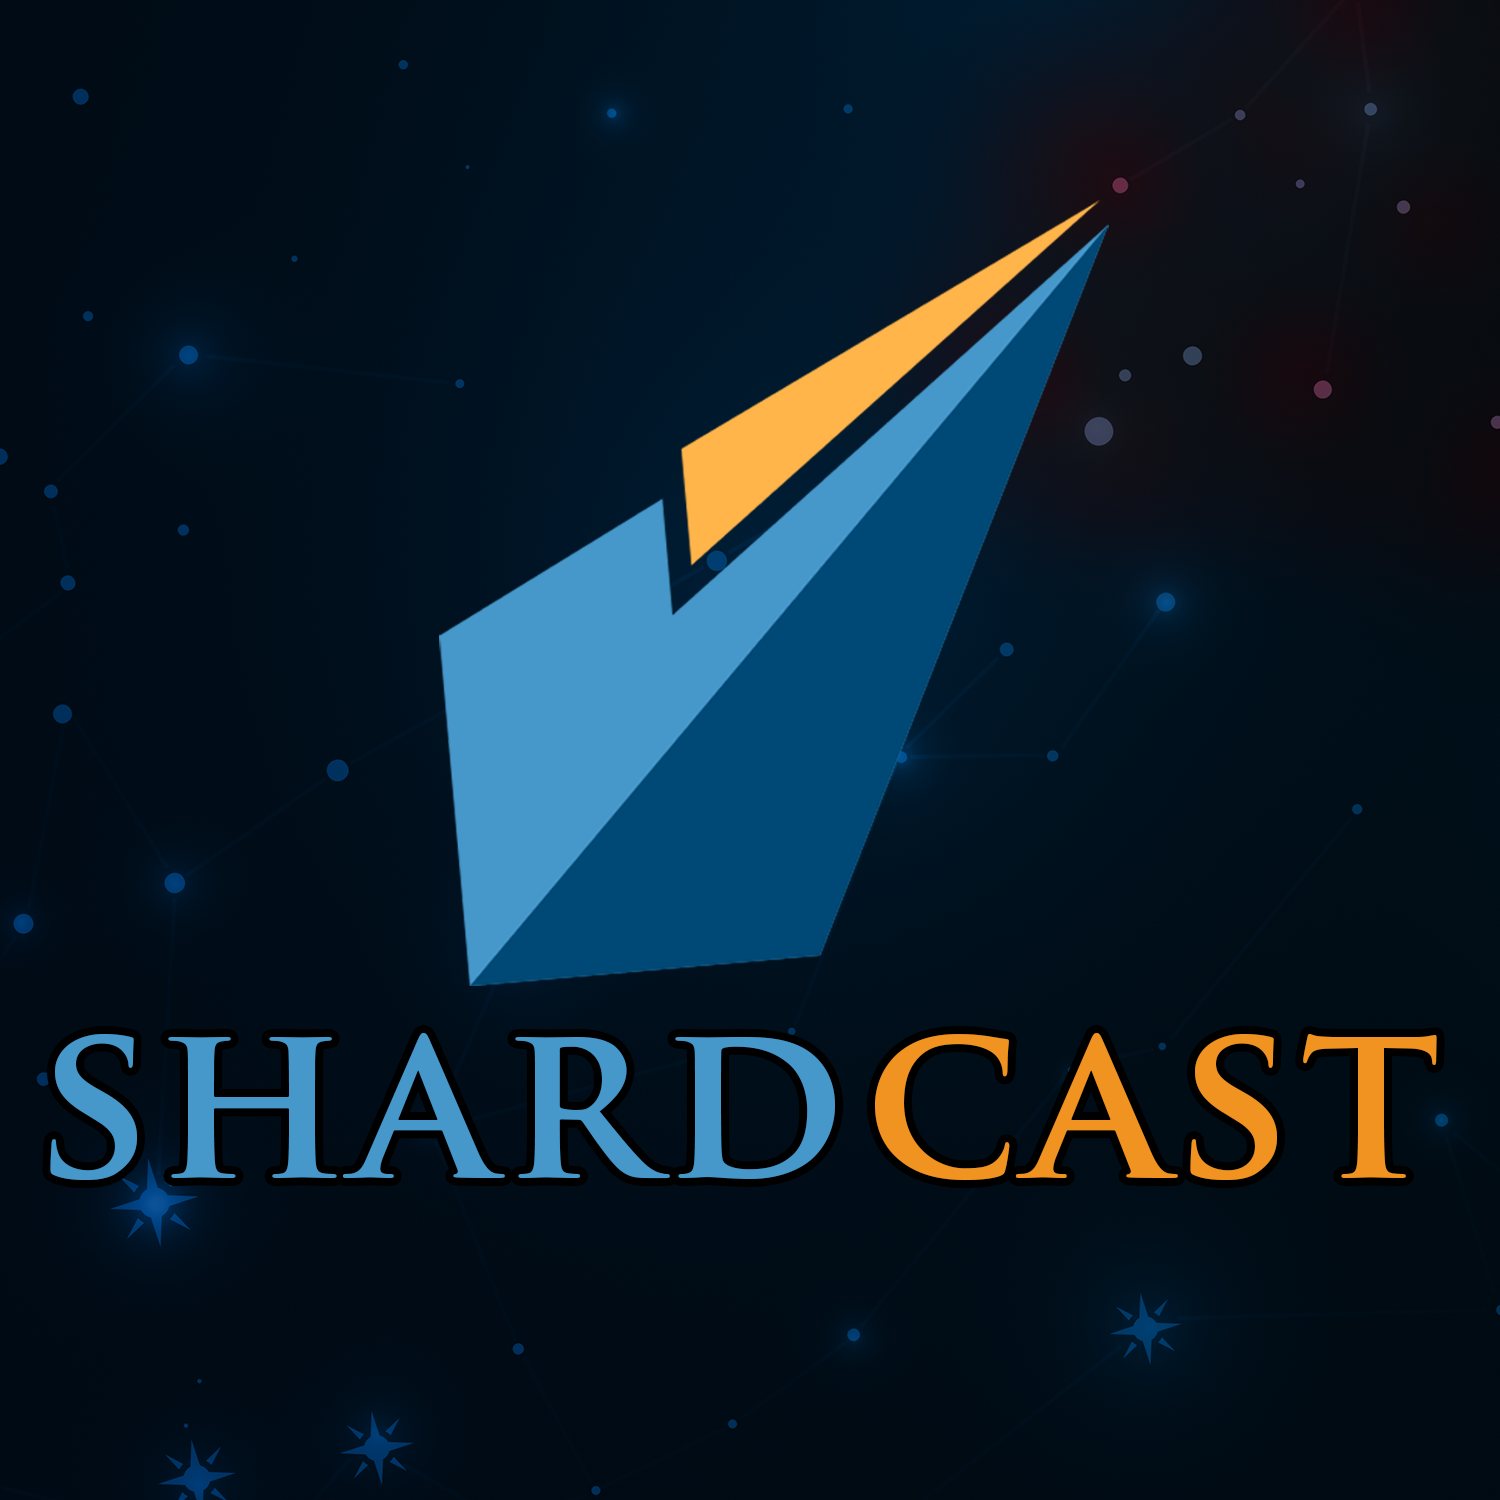 More information about "Shardcast: Aethers"